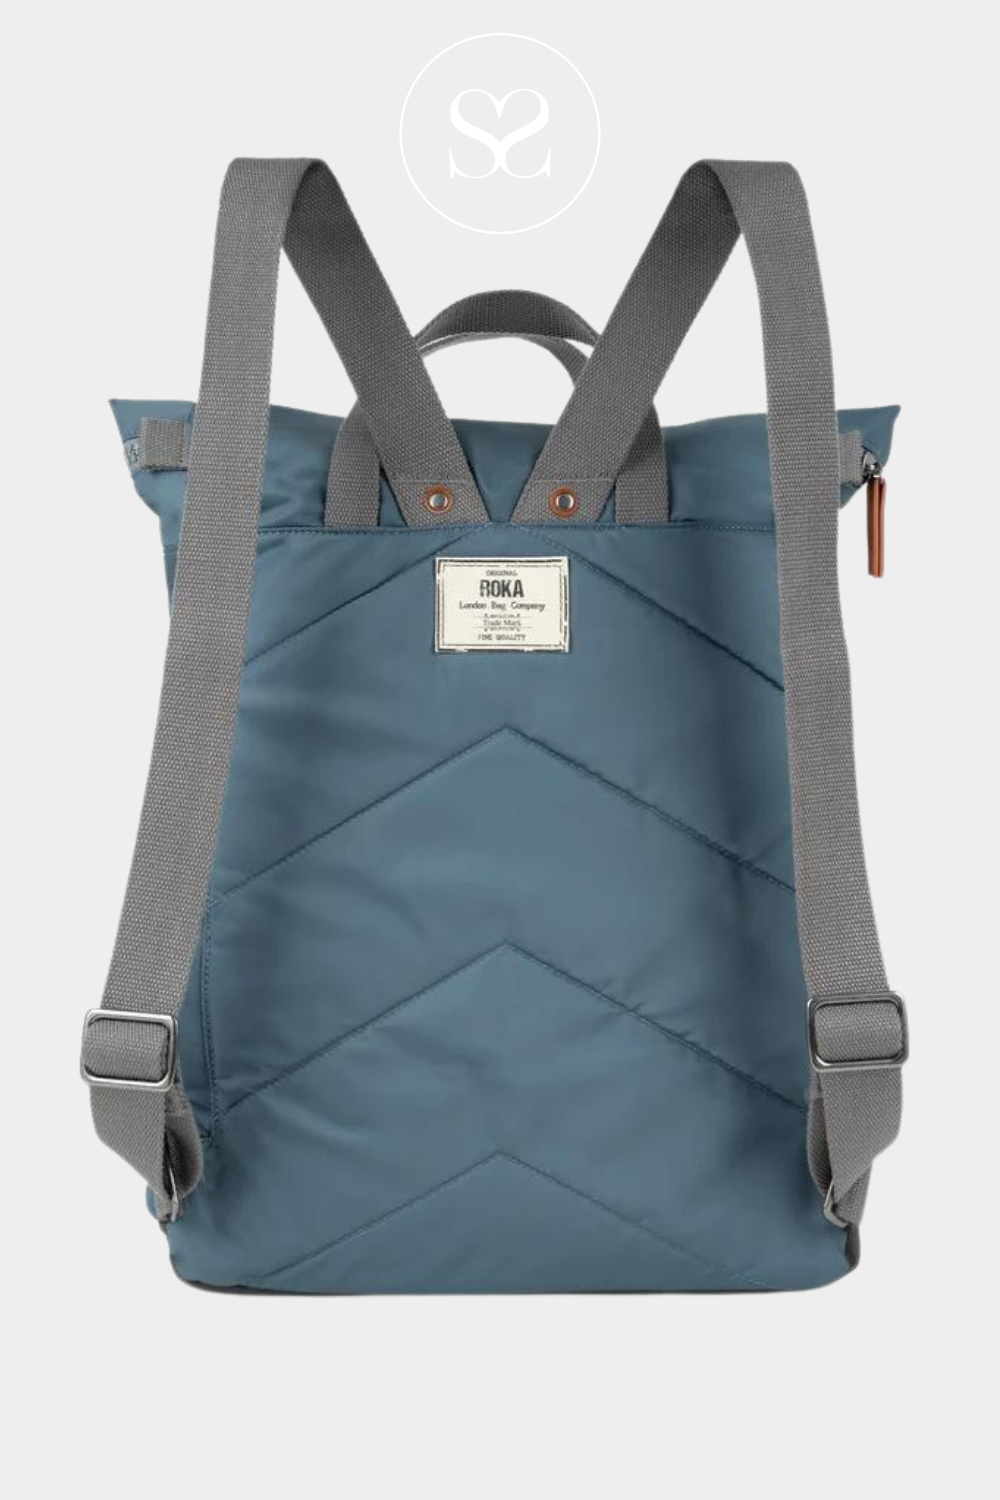 ROKA CANFIELD B WATERPROOF BACKPACK BAG WITH FRONT ZIP POCKER AND GREY HANDLE